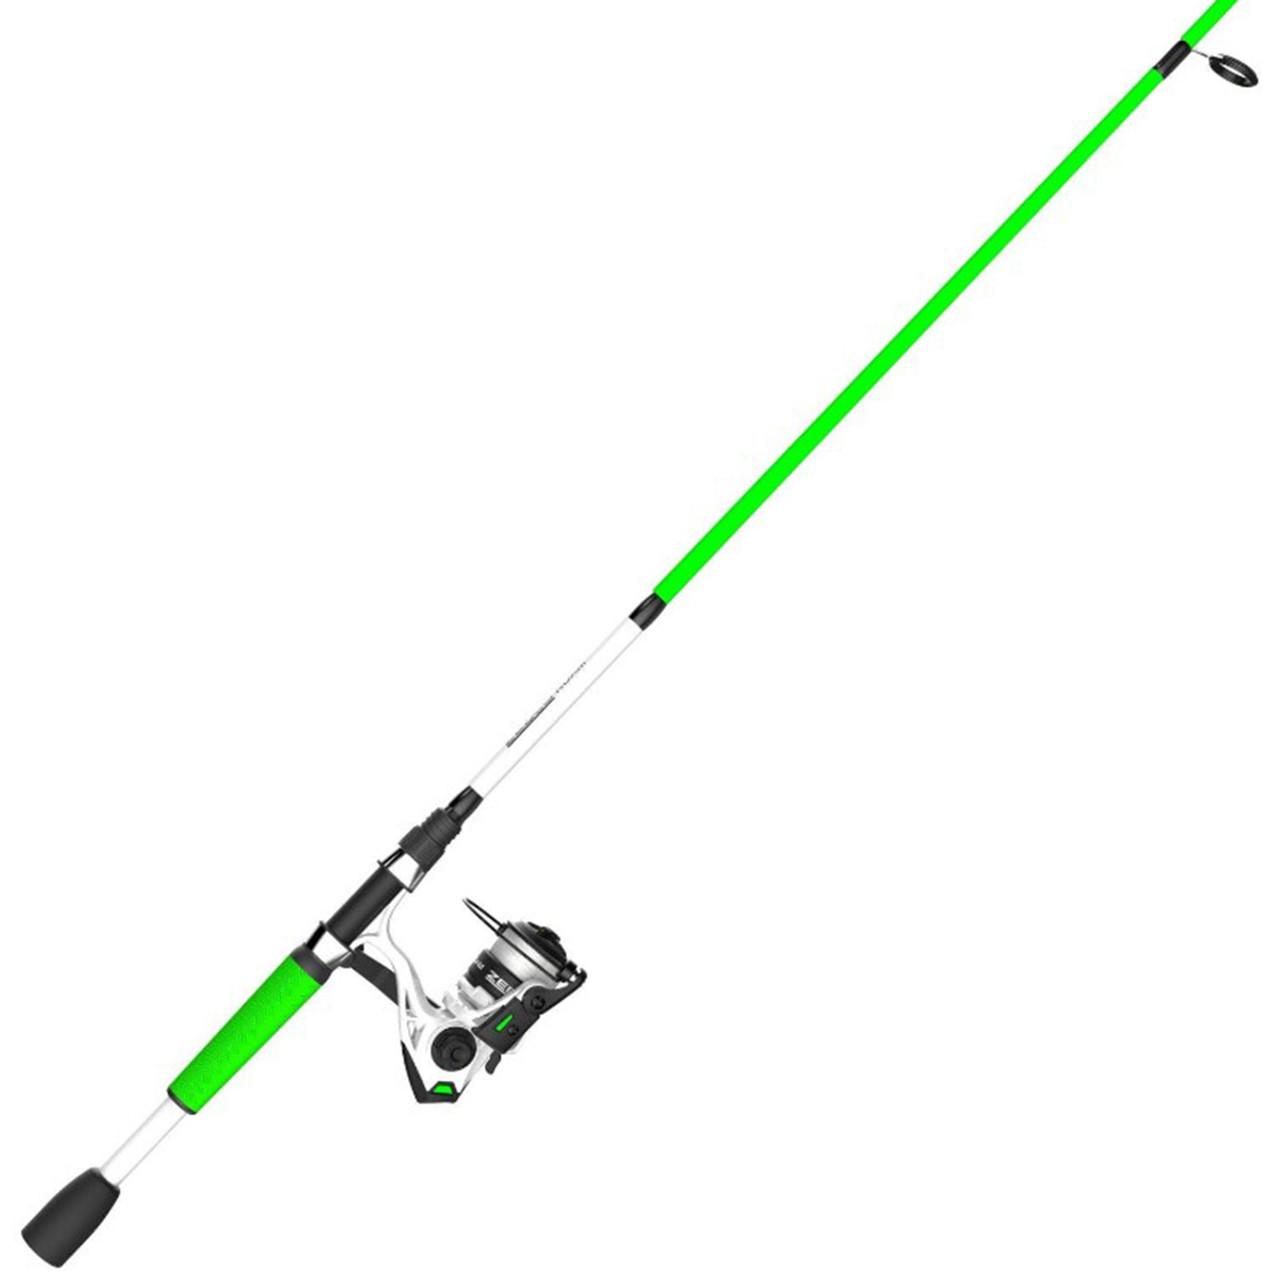 Zebco Roam 6 ft. Green Spinning Rod and Reel Combo